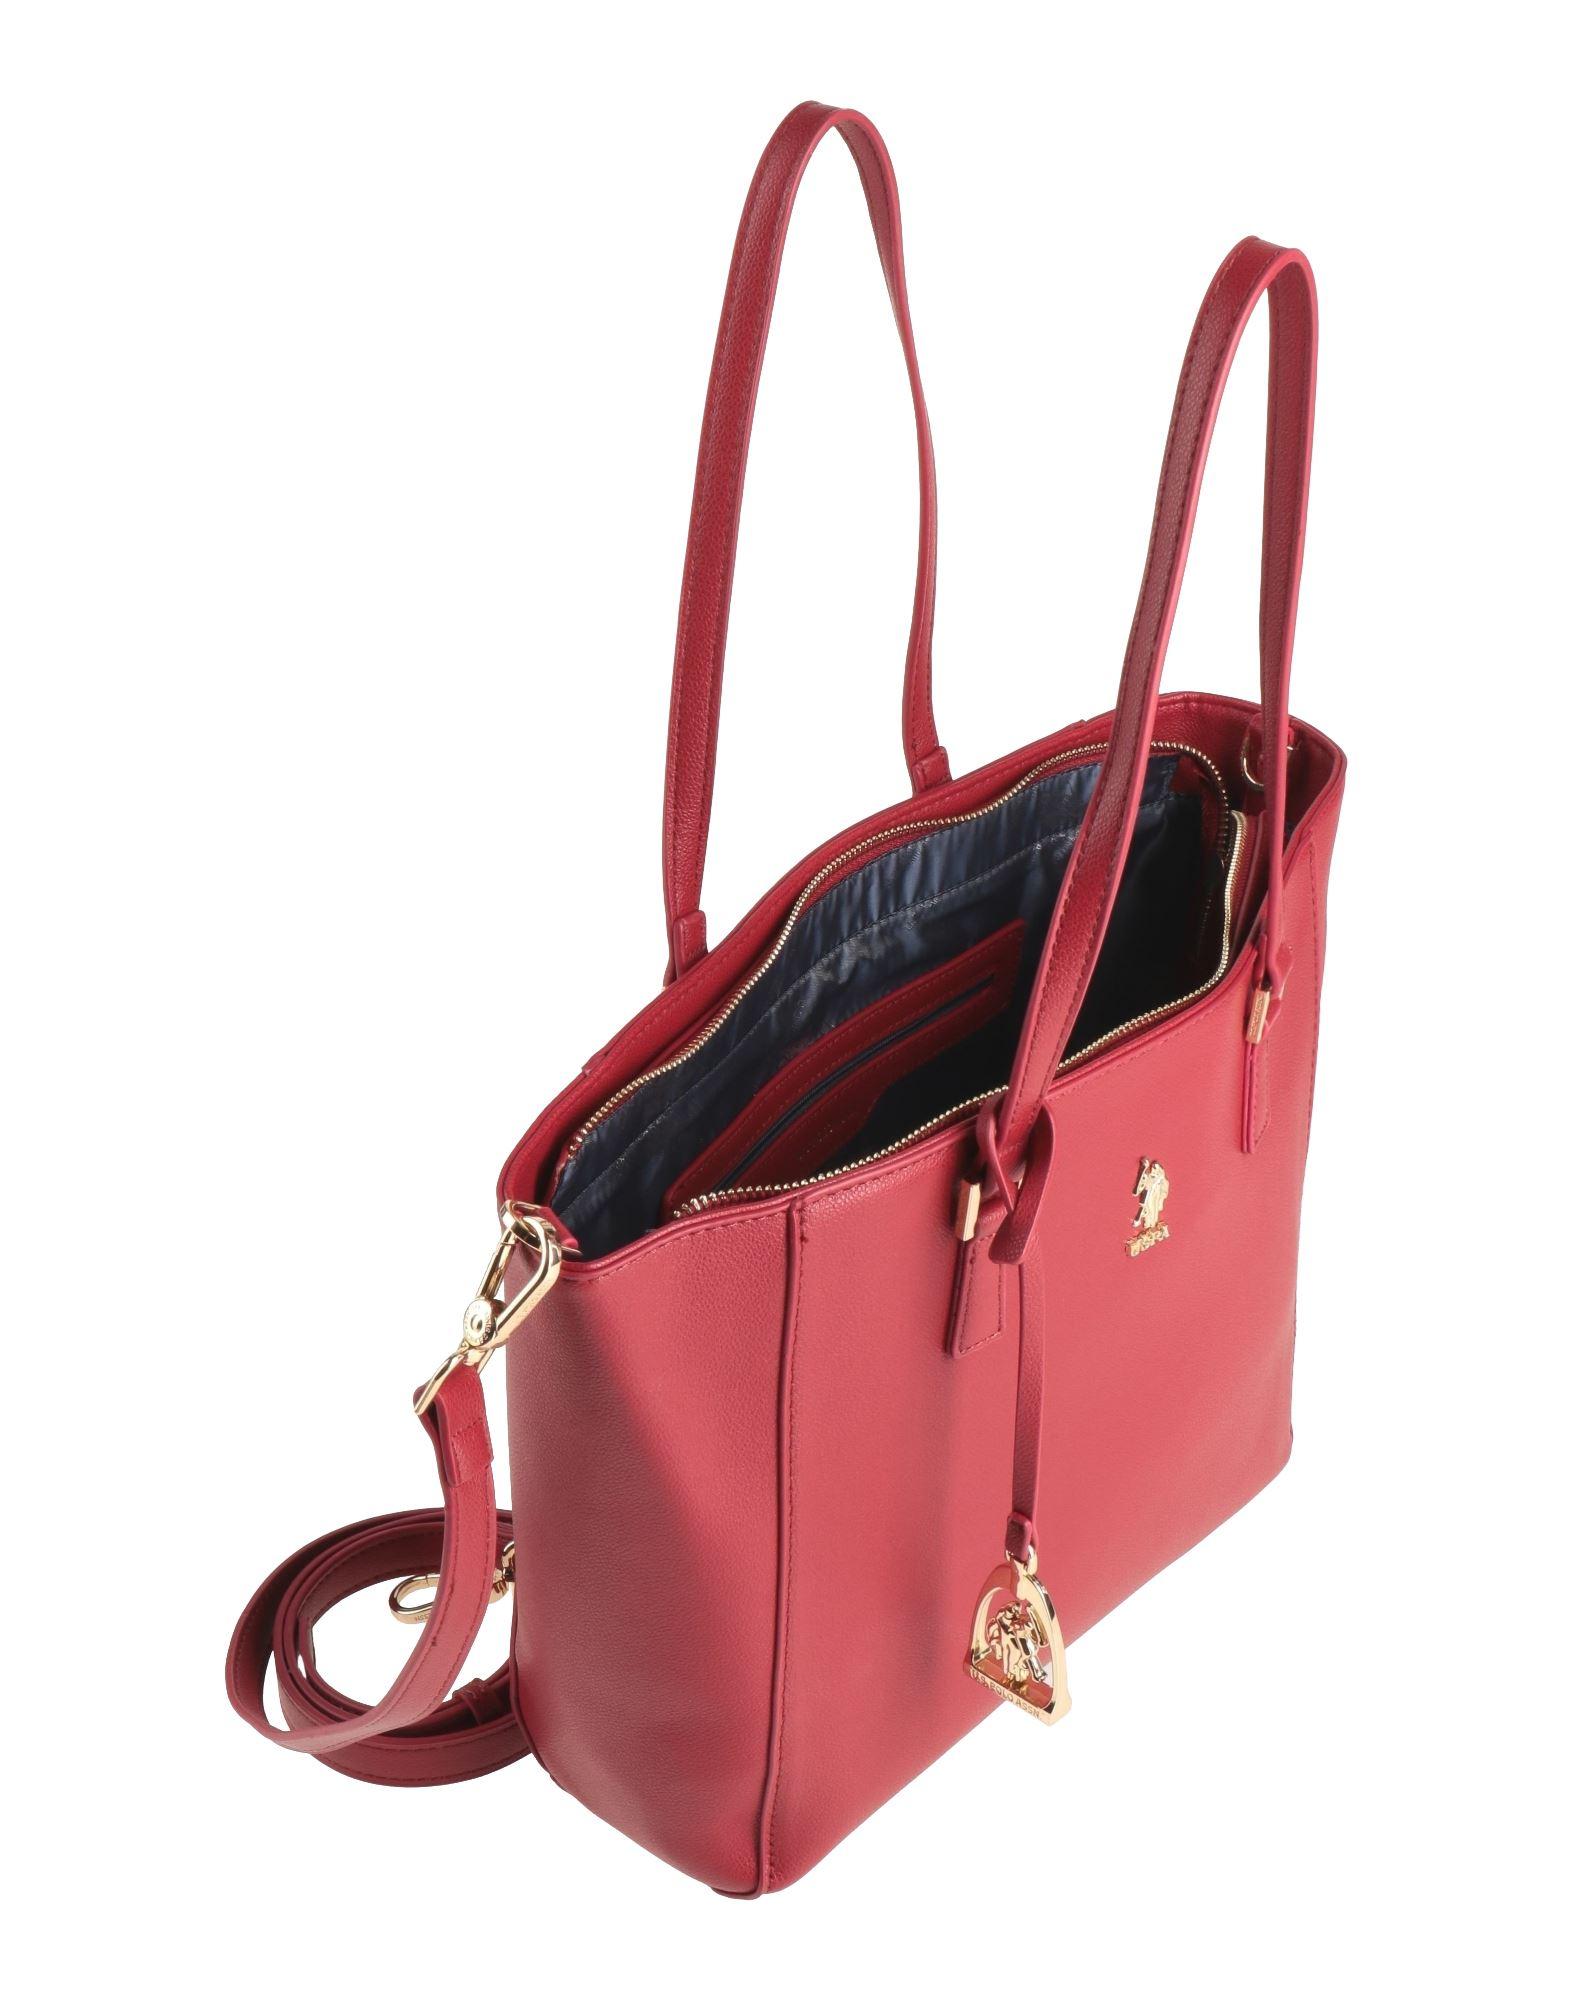 Stylish and Spacious US Polo Assn. Large Purse - Limited Time Offer!